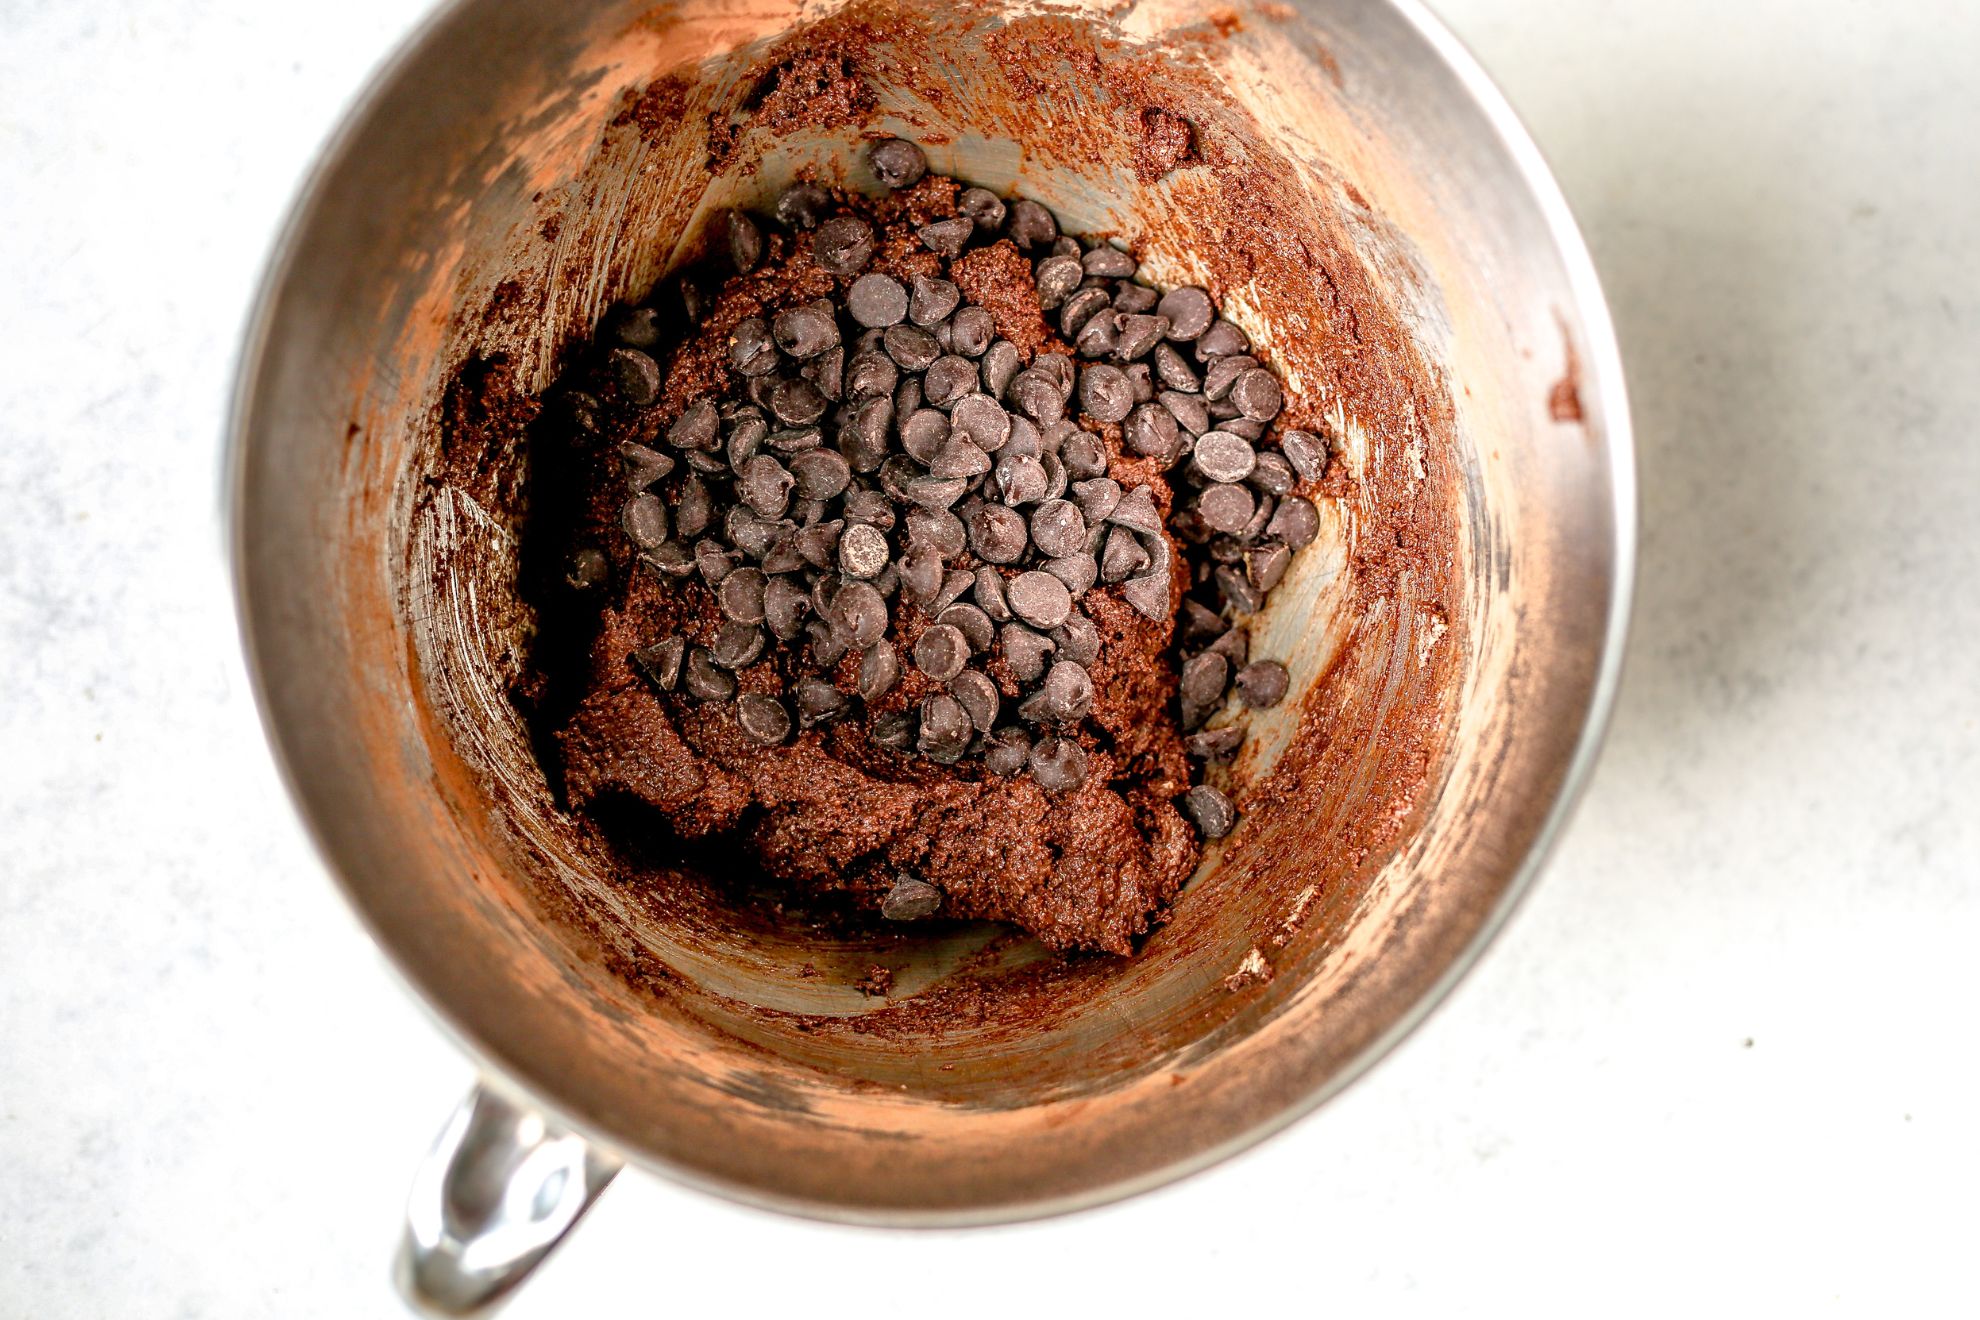 This is an overhead horizontal image of a silver mixing bowl with raw chocolate batter in it. Chocolate chips are on top of the batter. The mixing bowl sits on a light grey/white surface.